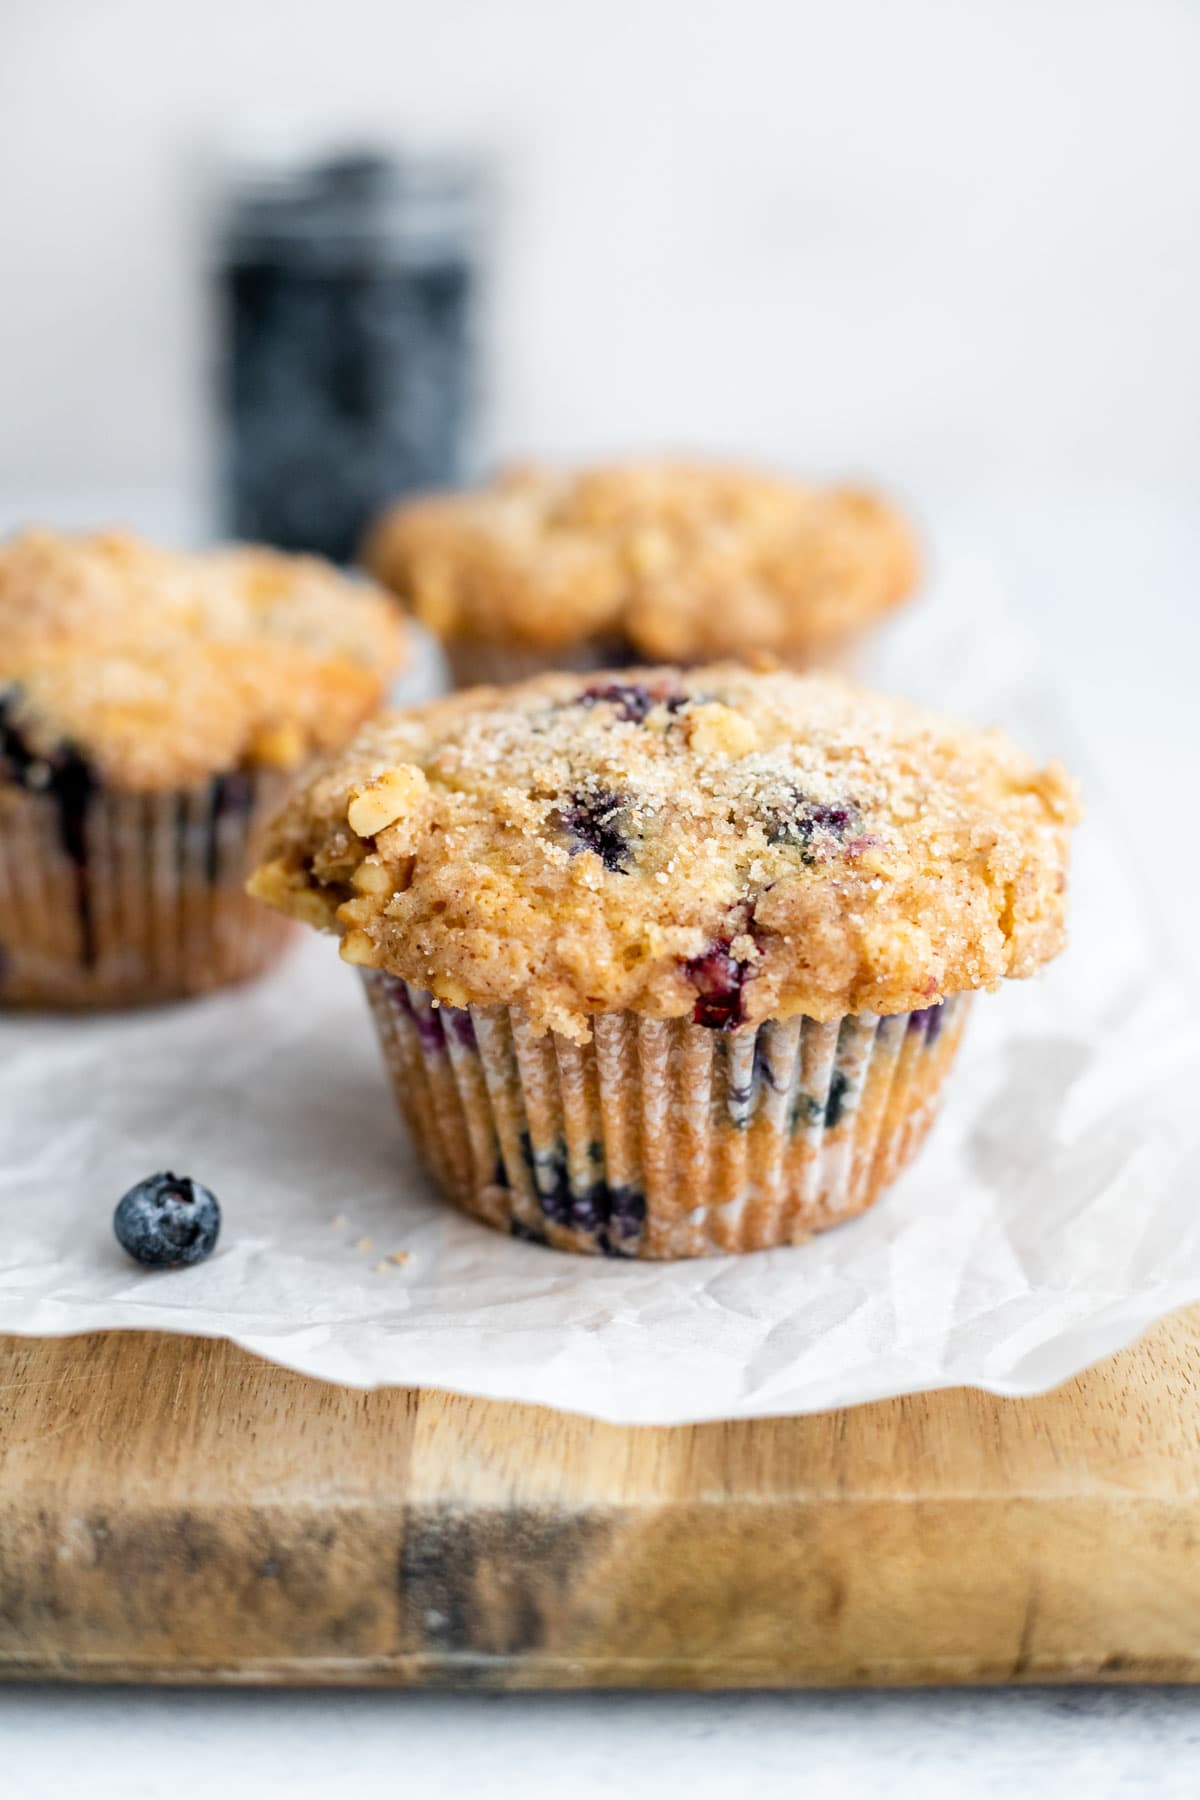 Three blueberry muffins resting on a cutting board in front of a jar of blueberries